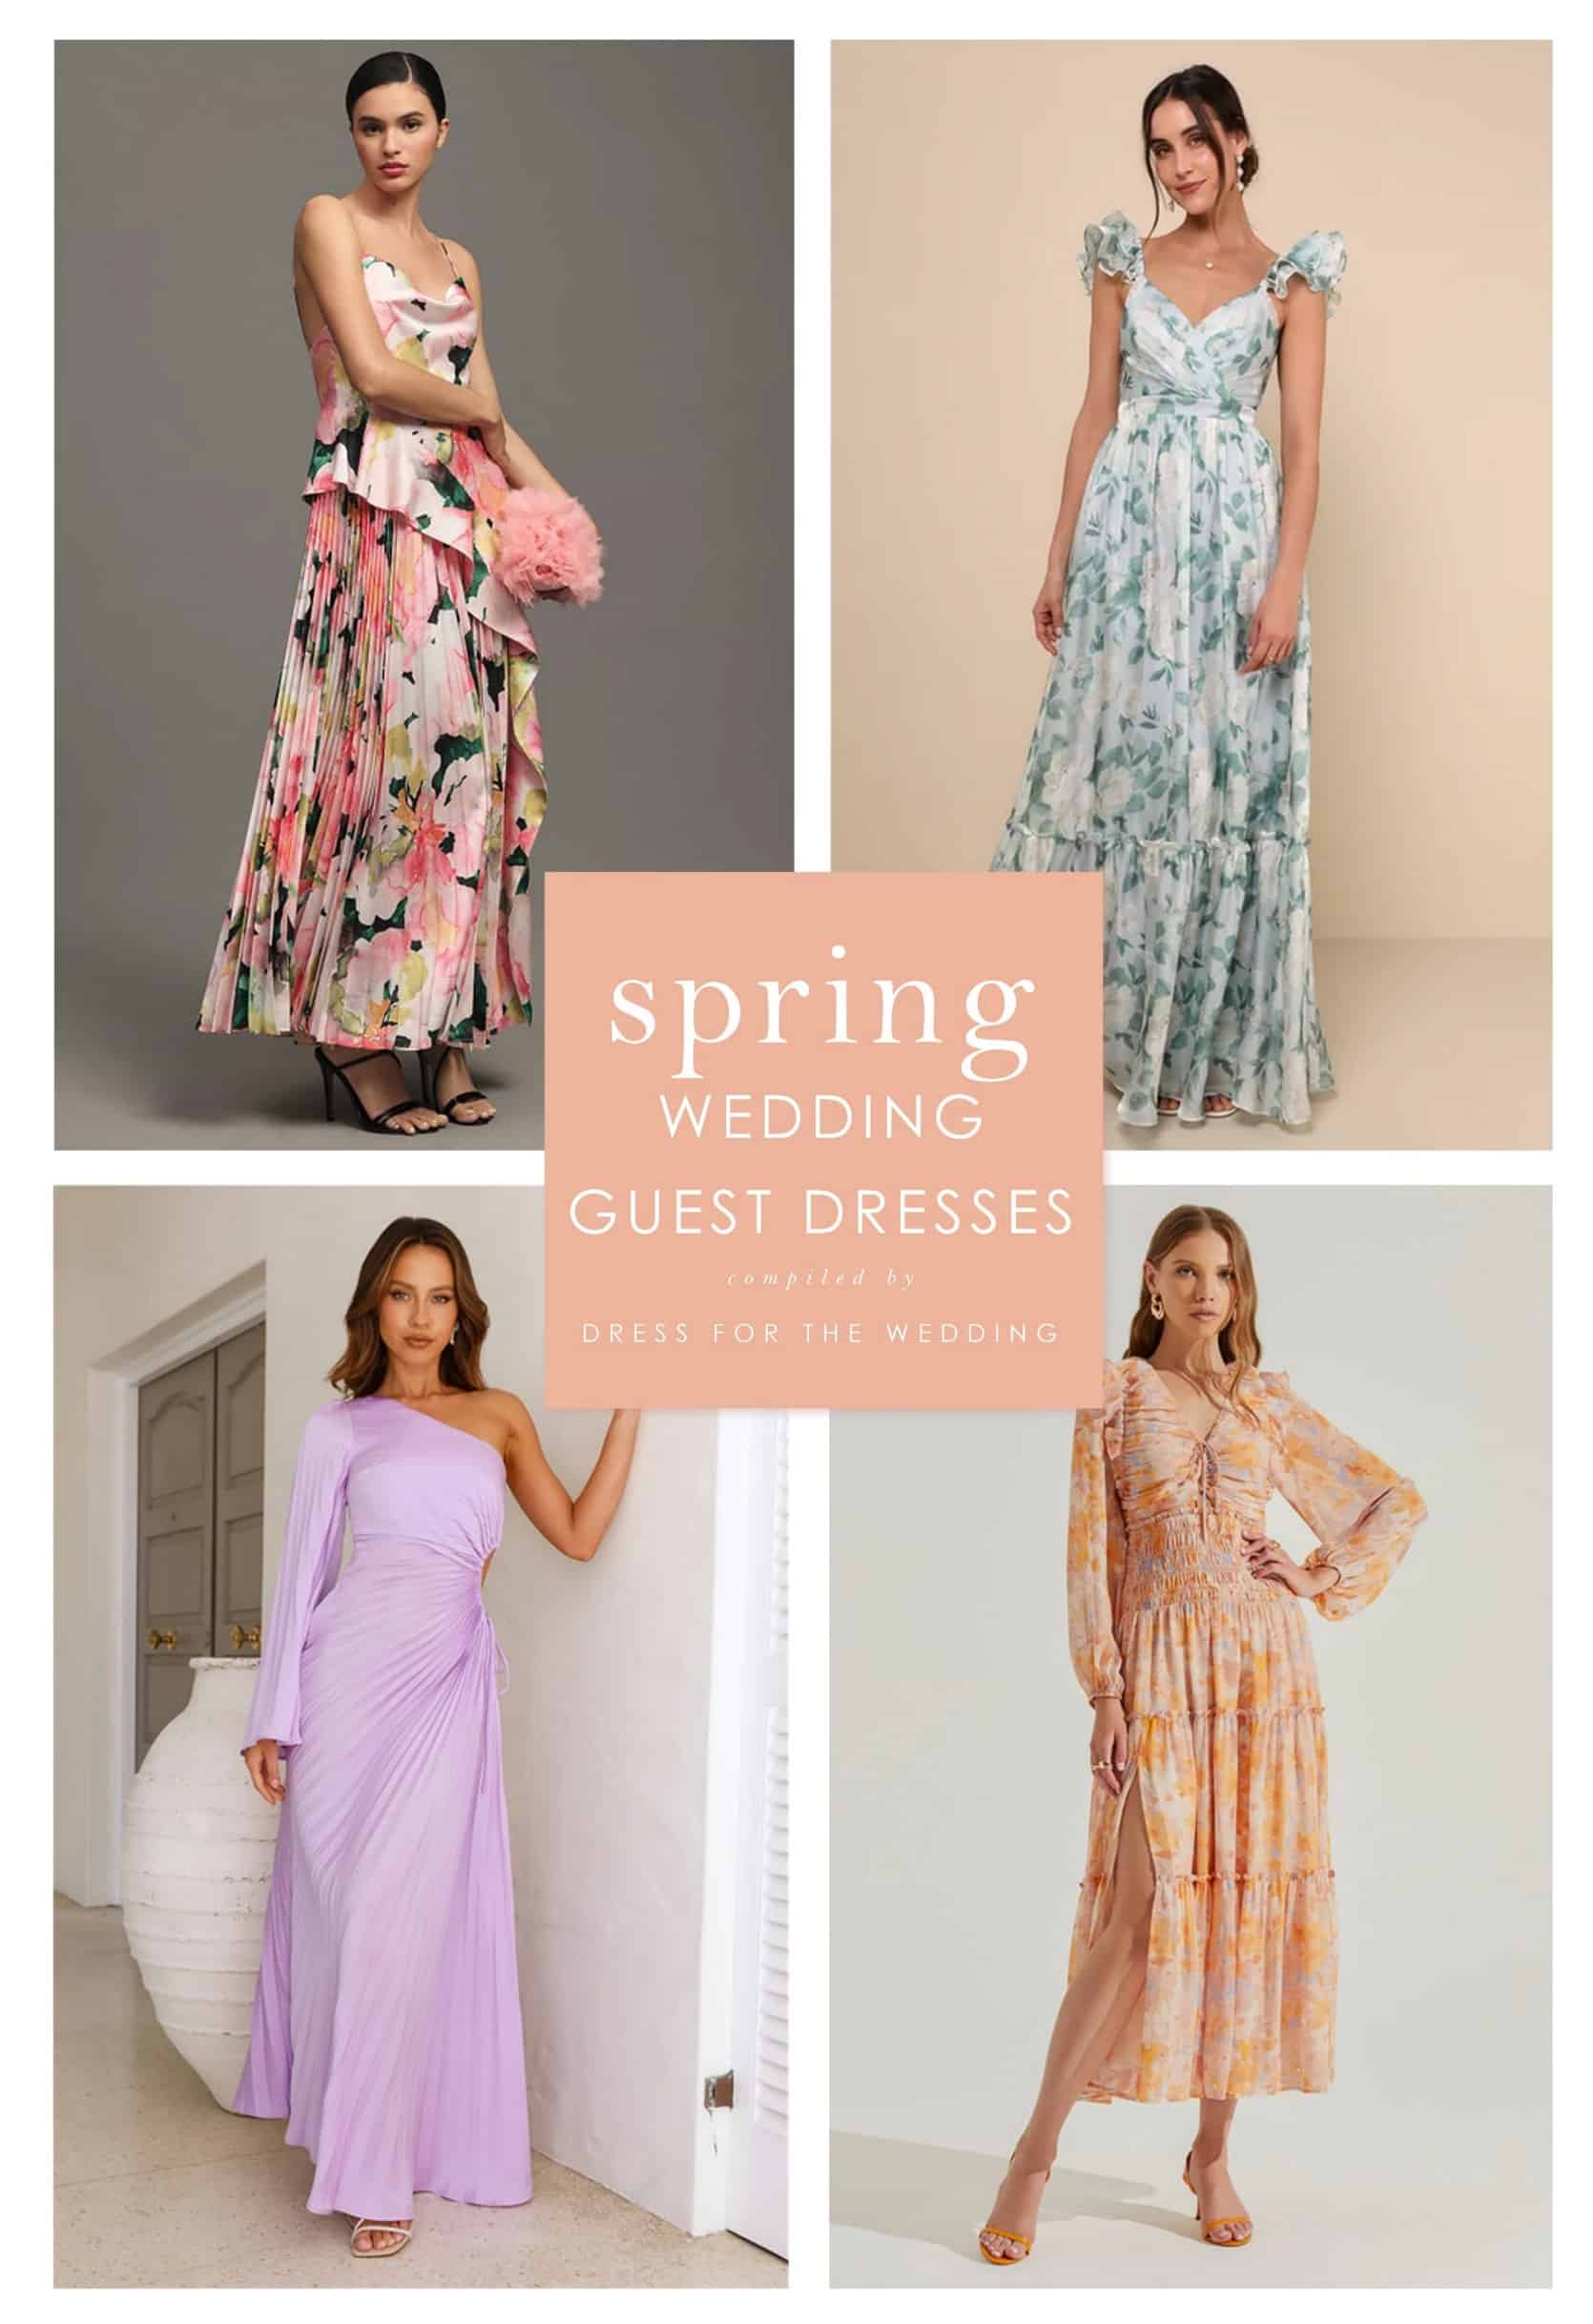 Some spring / summer wedding guest dresses that work for my fuller